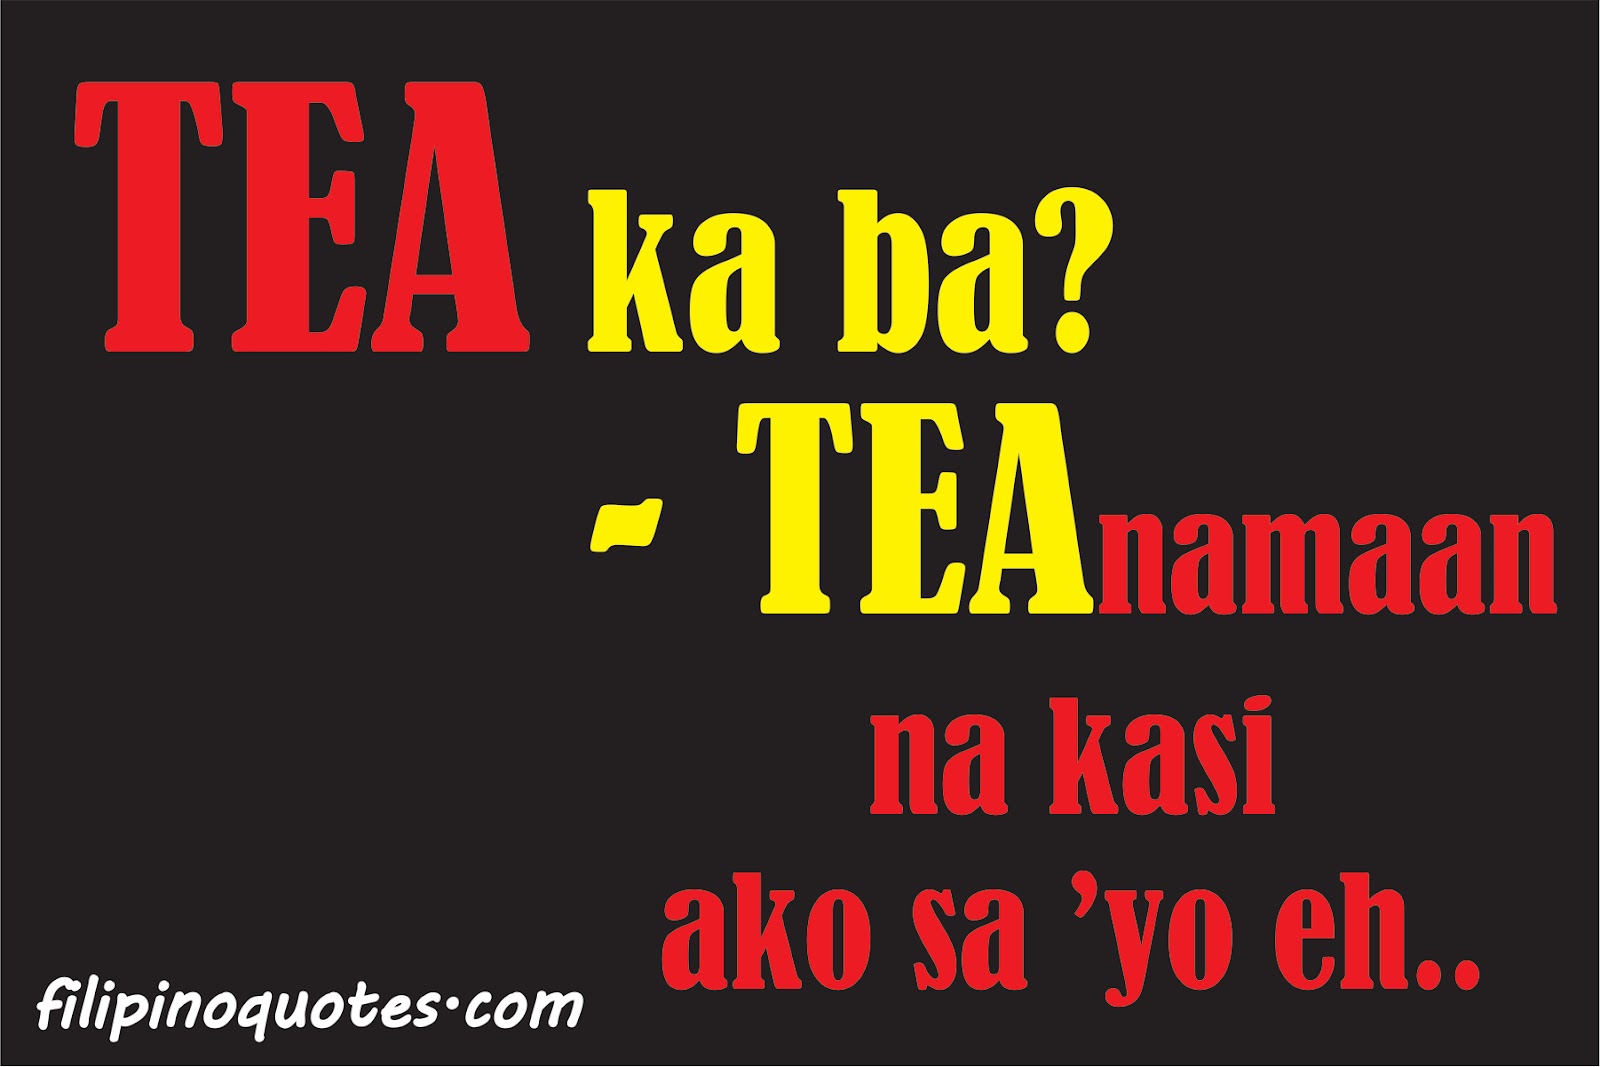 Funny PickUp Lines - Tagalog Love Quotes